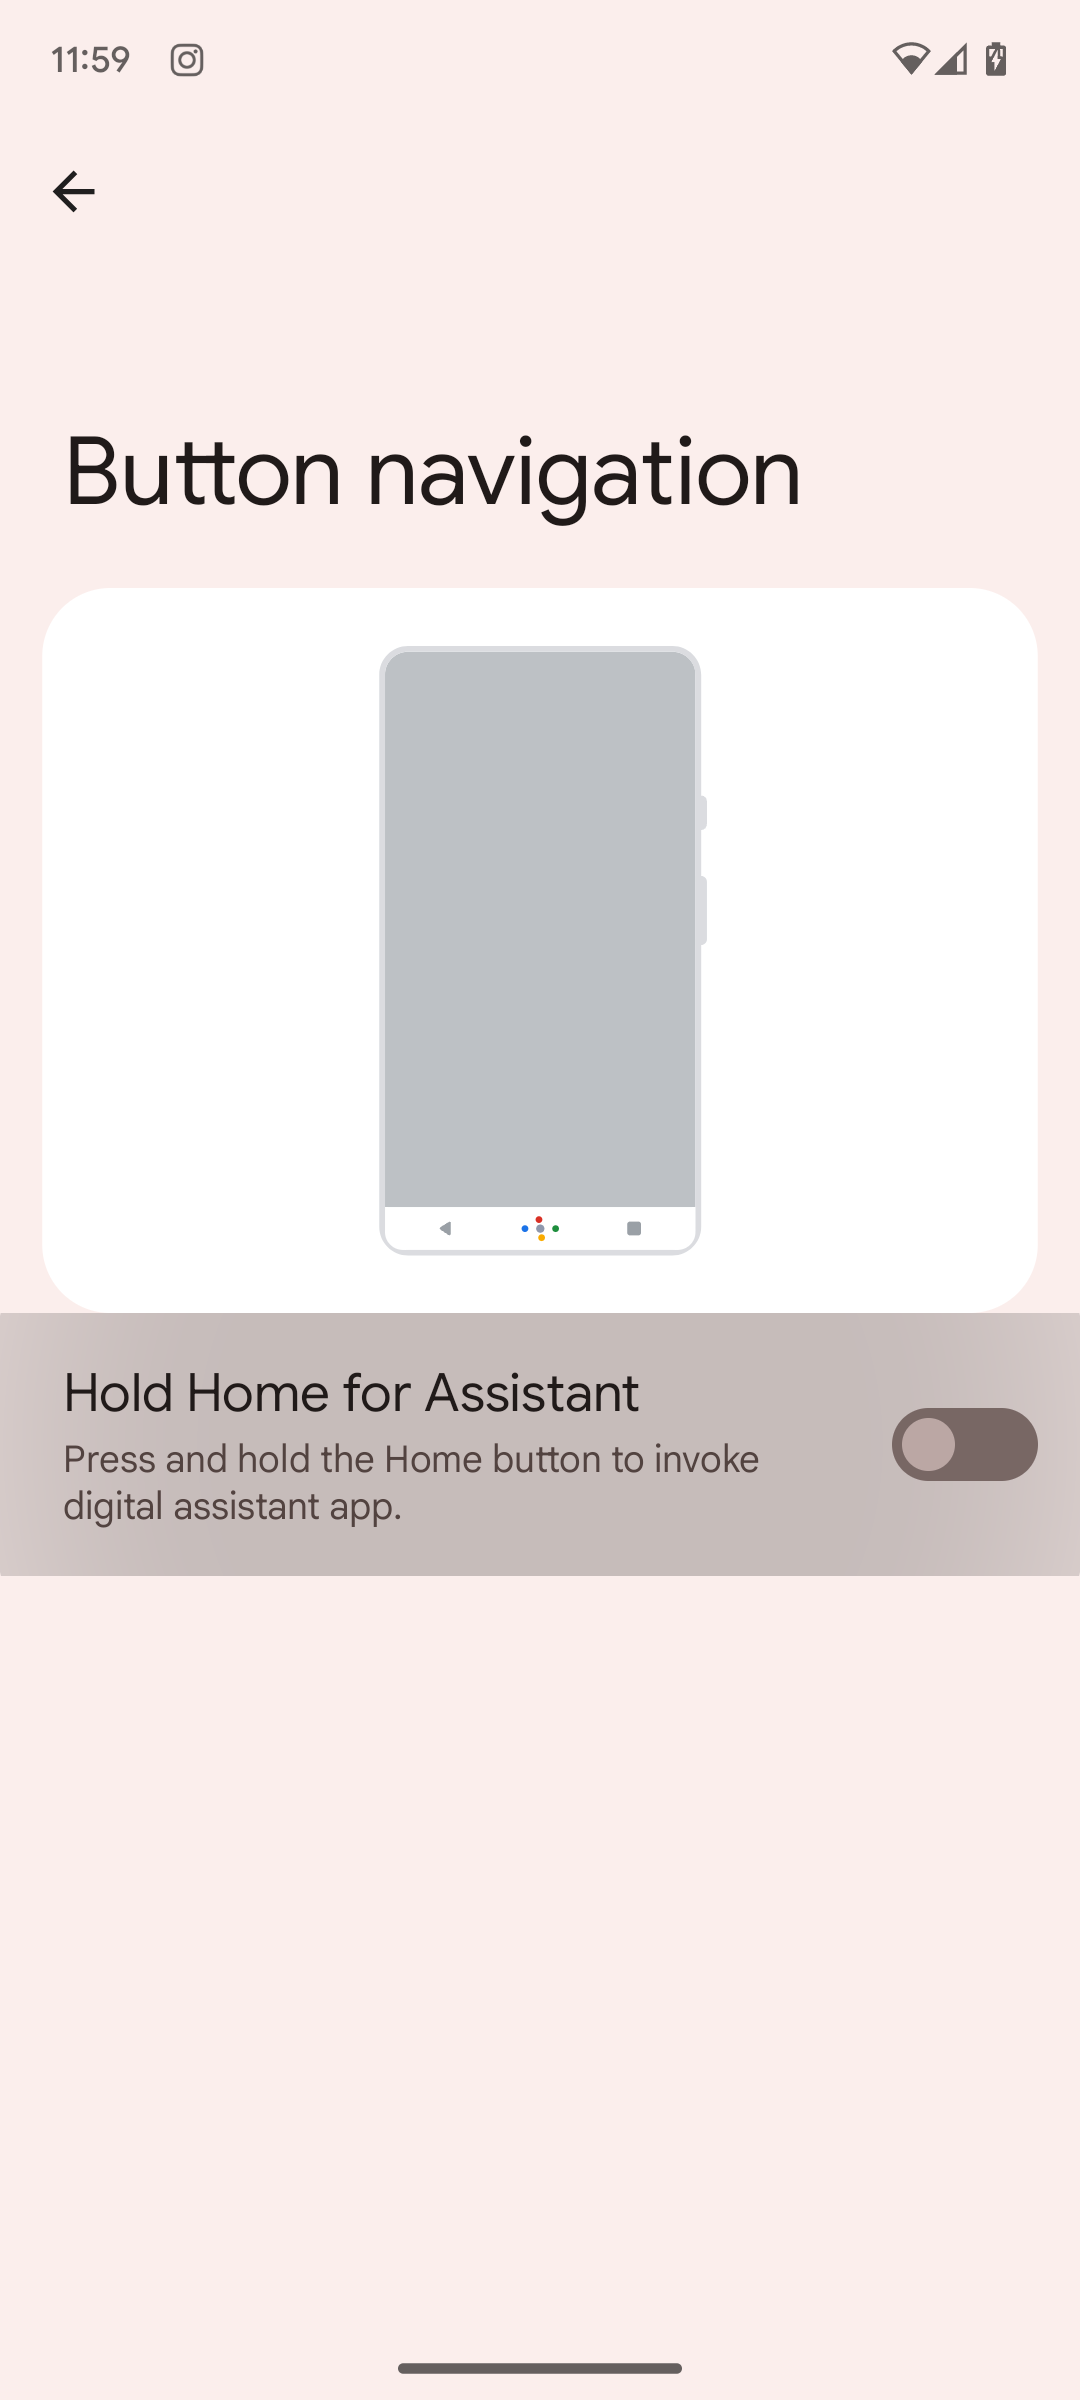 Android 13's button navigation settings with Hold Home for Assistant toggle